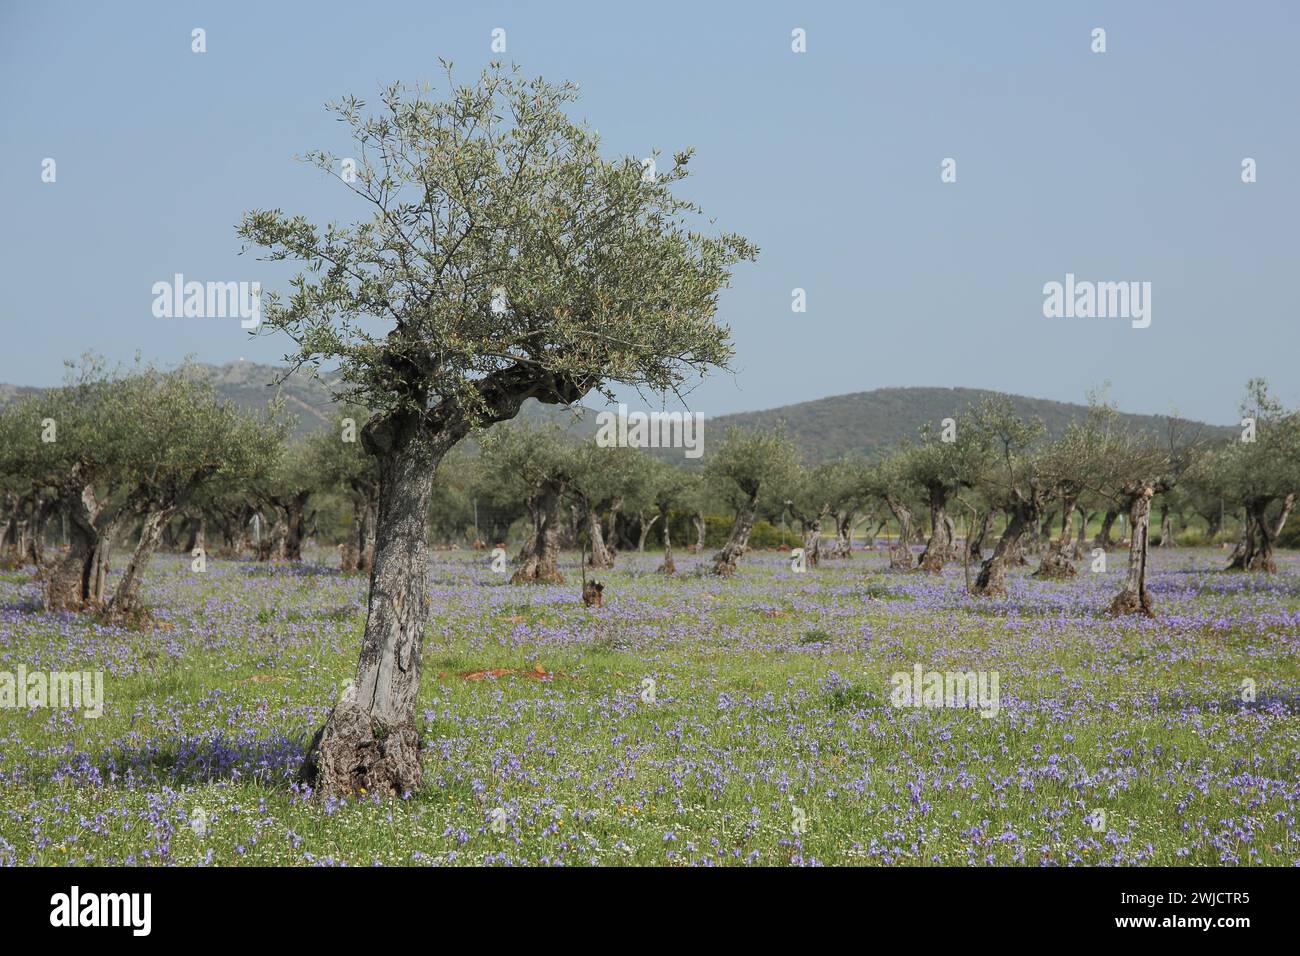 Plantation with olive tree (Olea europaea) with flower meadow of noonday iris (Gynandriris sisyrinchium), grove, cultivation, horticulture, trees Stock Photo